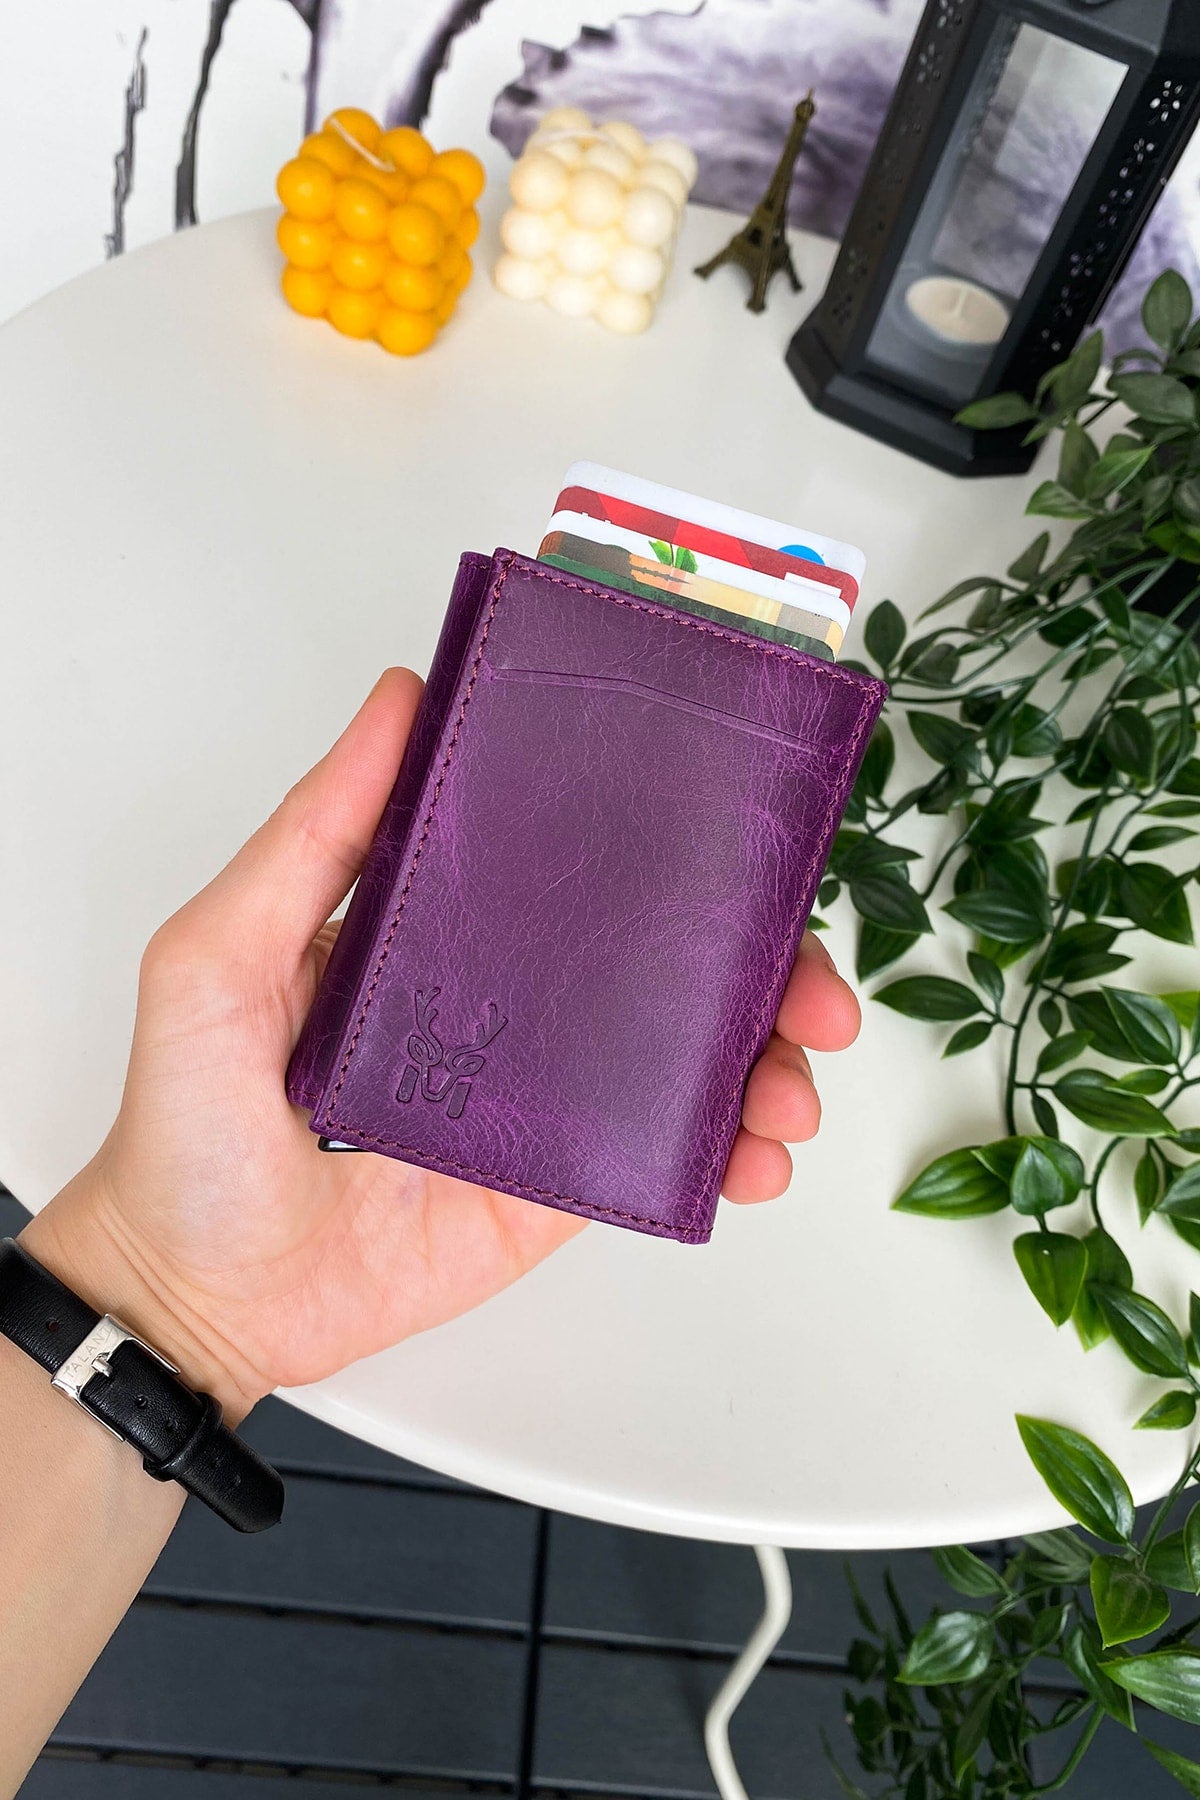 Pescol - Genuine Leather Purple Smart Card Holder / Wallet with Rfid Protection Mechanism, Top Level Craftsmanship